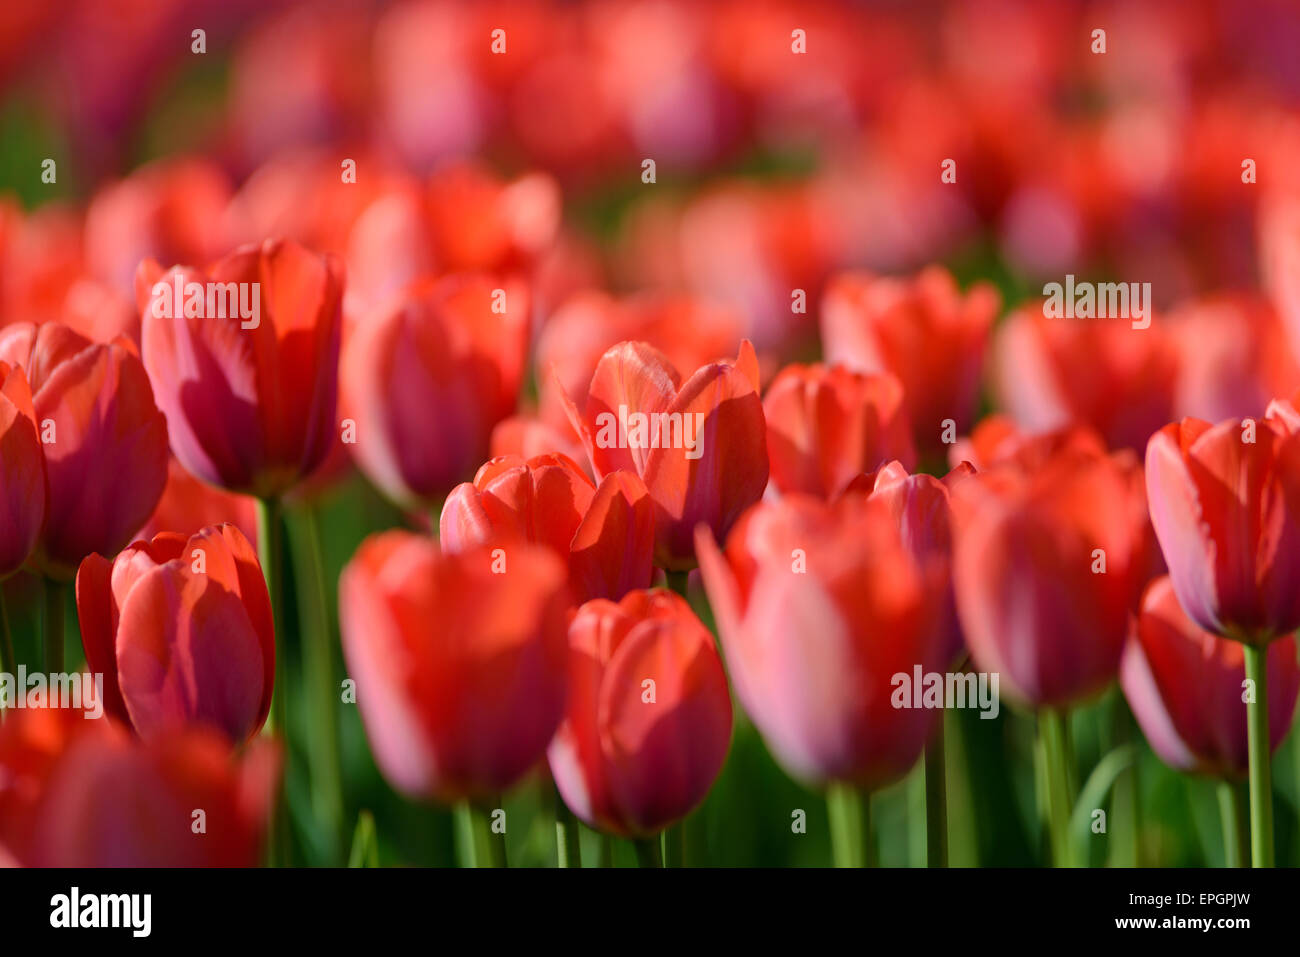 Flowers: red tulips in the garden, blurred background Stock Photo